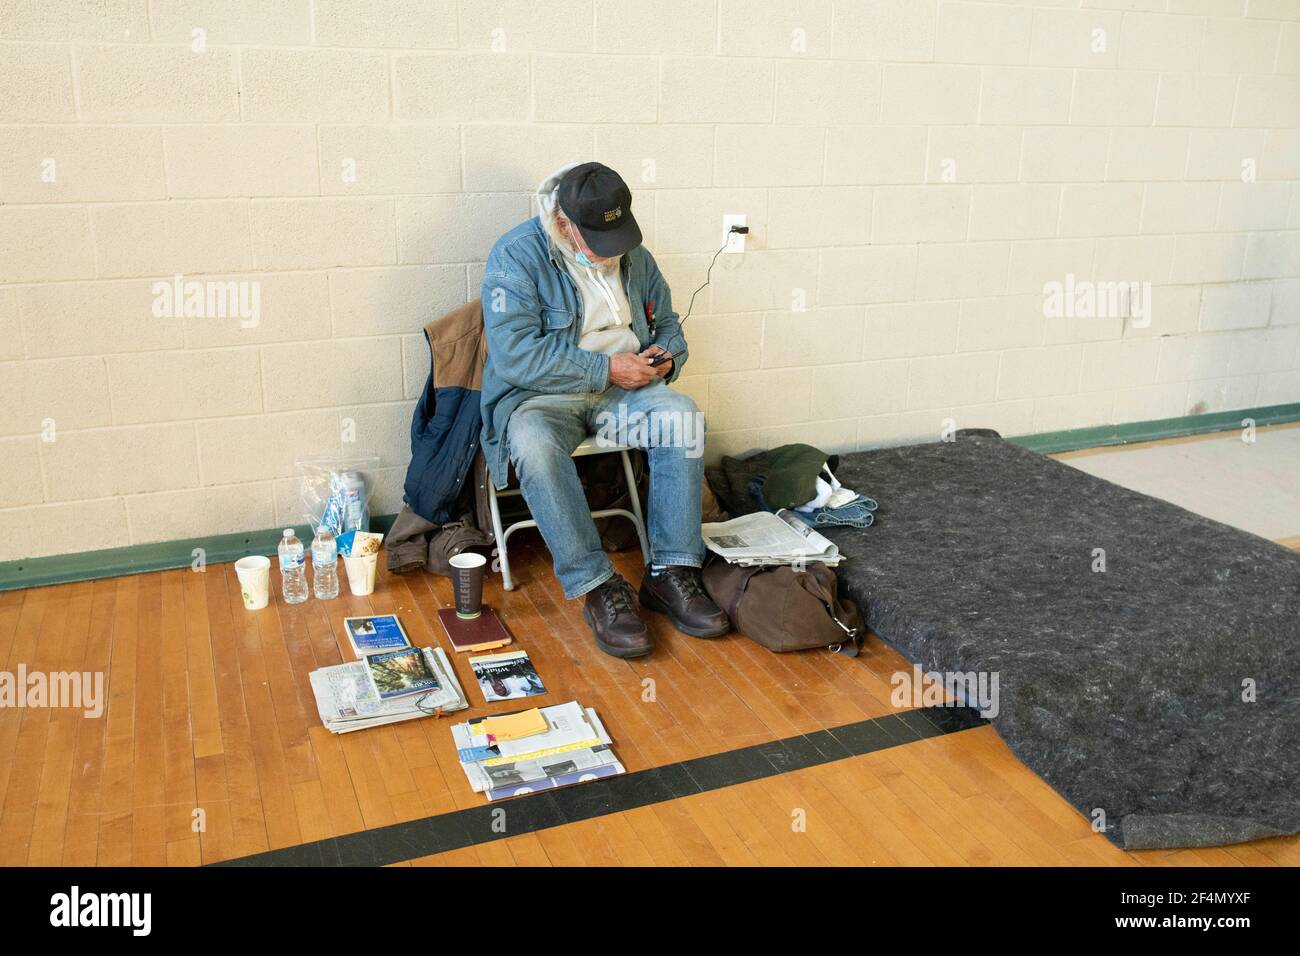 Austin, TX USA  Feb 20, 2021: A homeless guest man who stayed all week in a church shelter during the epic Texas snowstorm of 2021 charges his cell phone by his sleeping mat. Texas reported 57 deaths statewide due to the heavy snow and days of below-freezing temperatures, both unusual in this part of the country. ©Bob Daemmrich Stock Photo